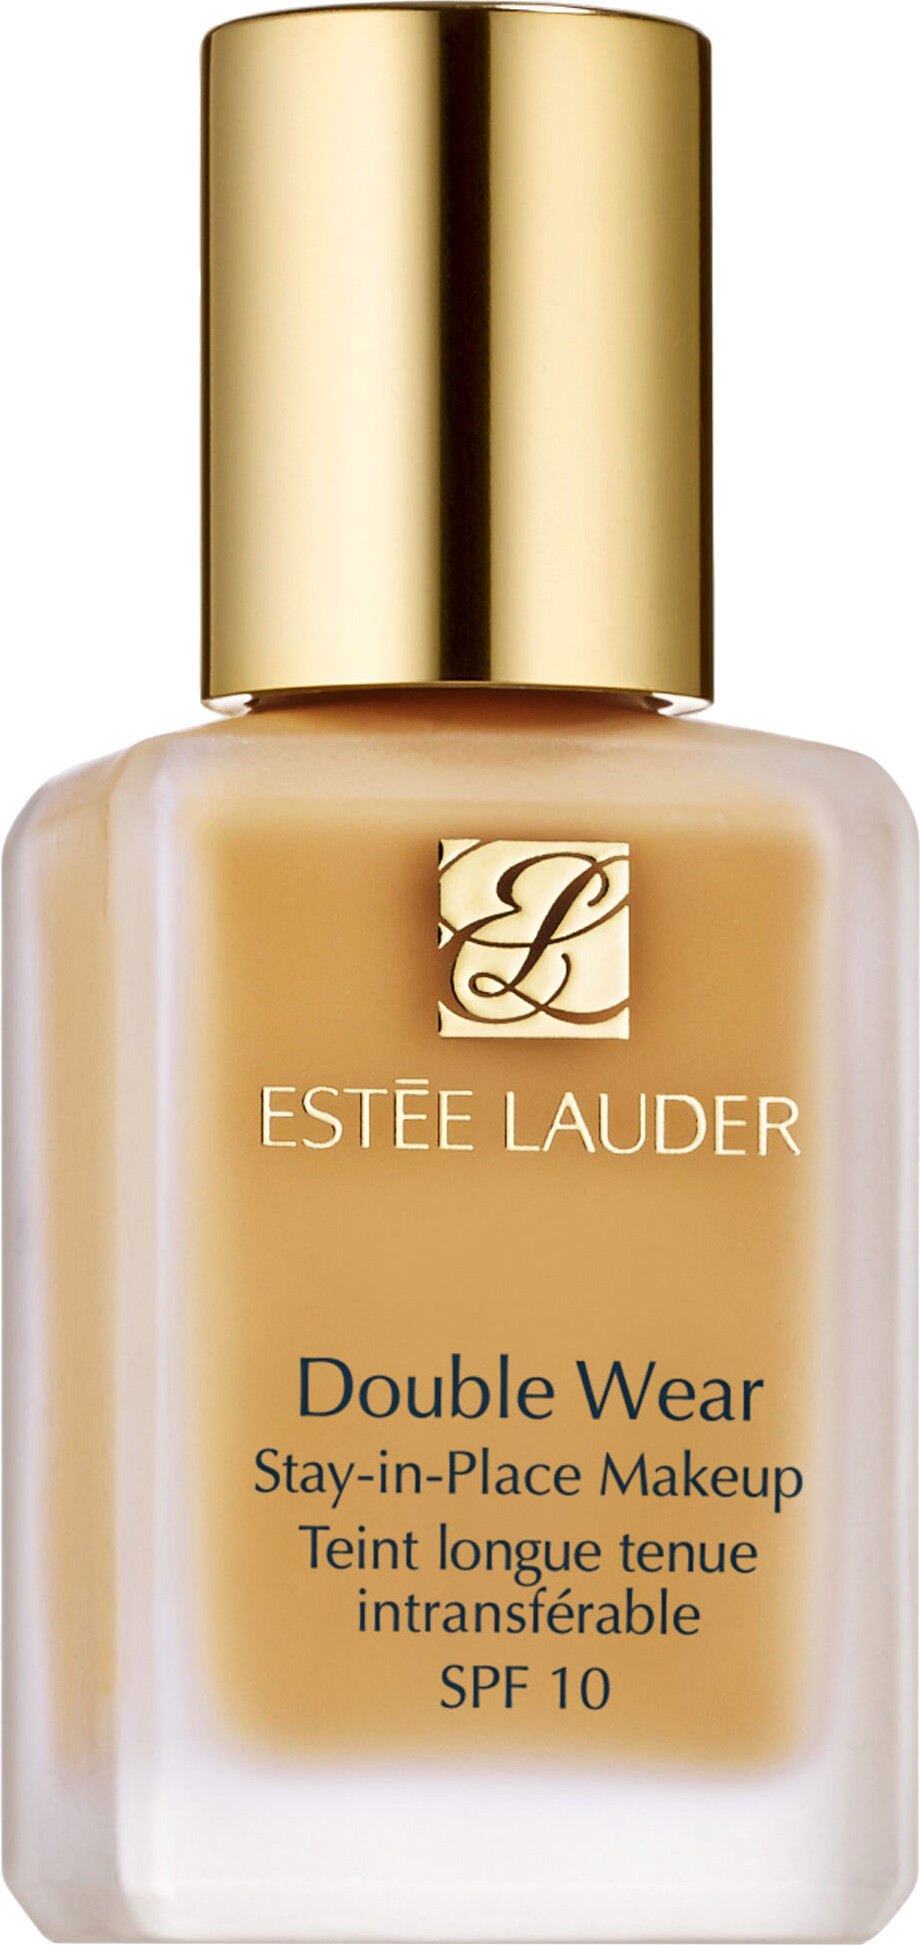 Estee Lauder Double Wear Stay-in-Place Foundation SPF10 30ml 2W1.5 - Natural Suede